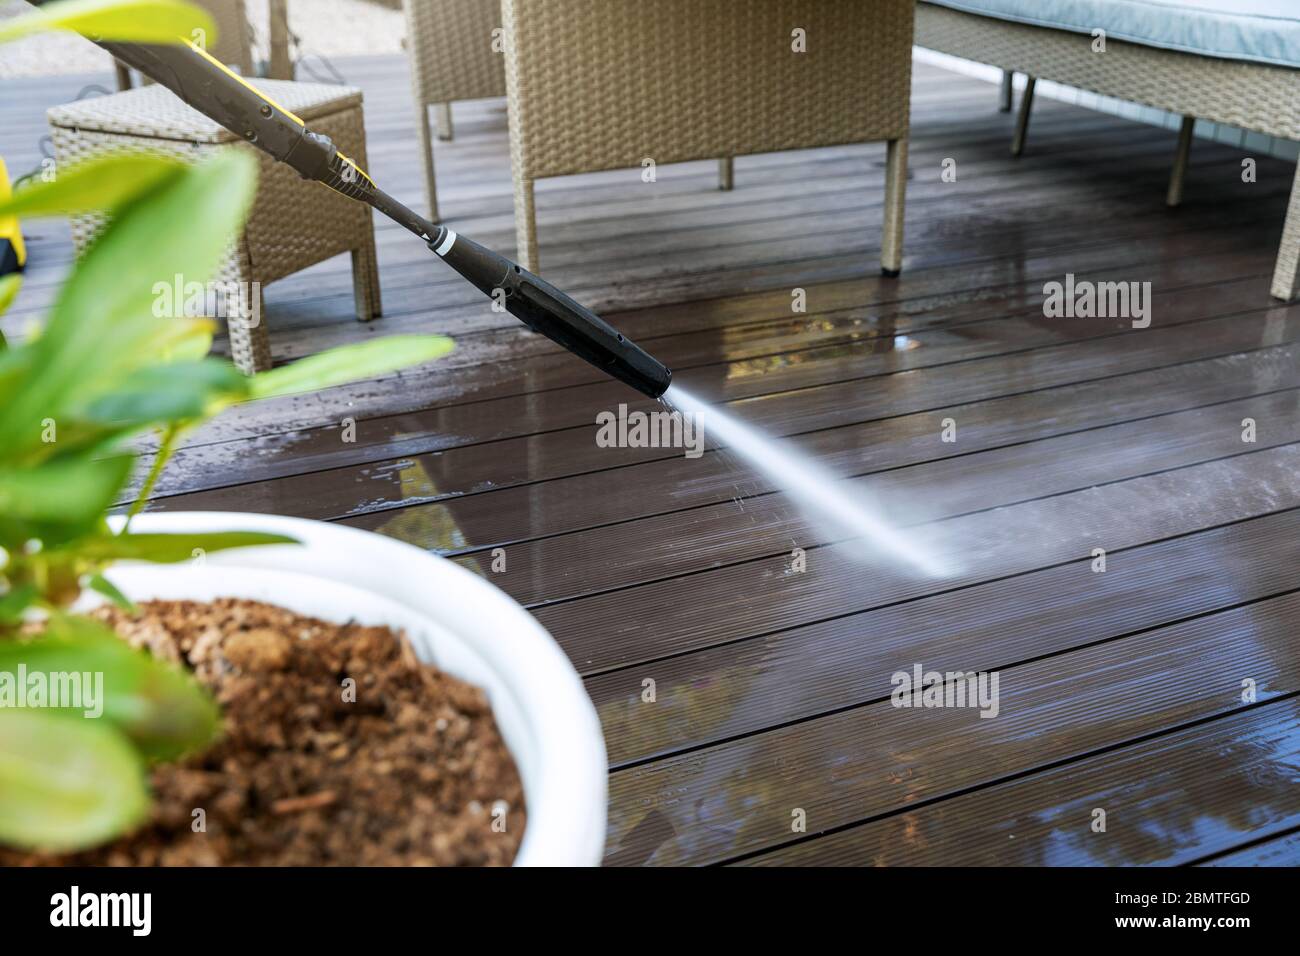 cleaning wooden terrace planks with high pressure washer Stock Photo